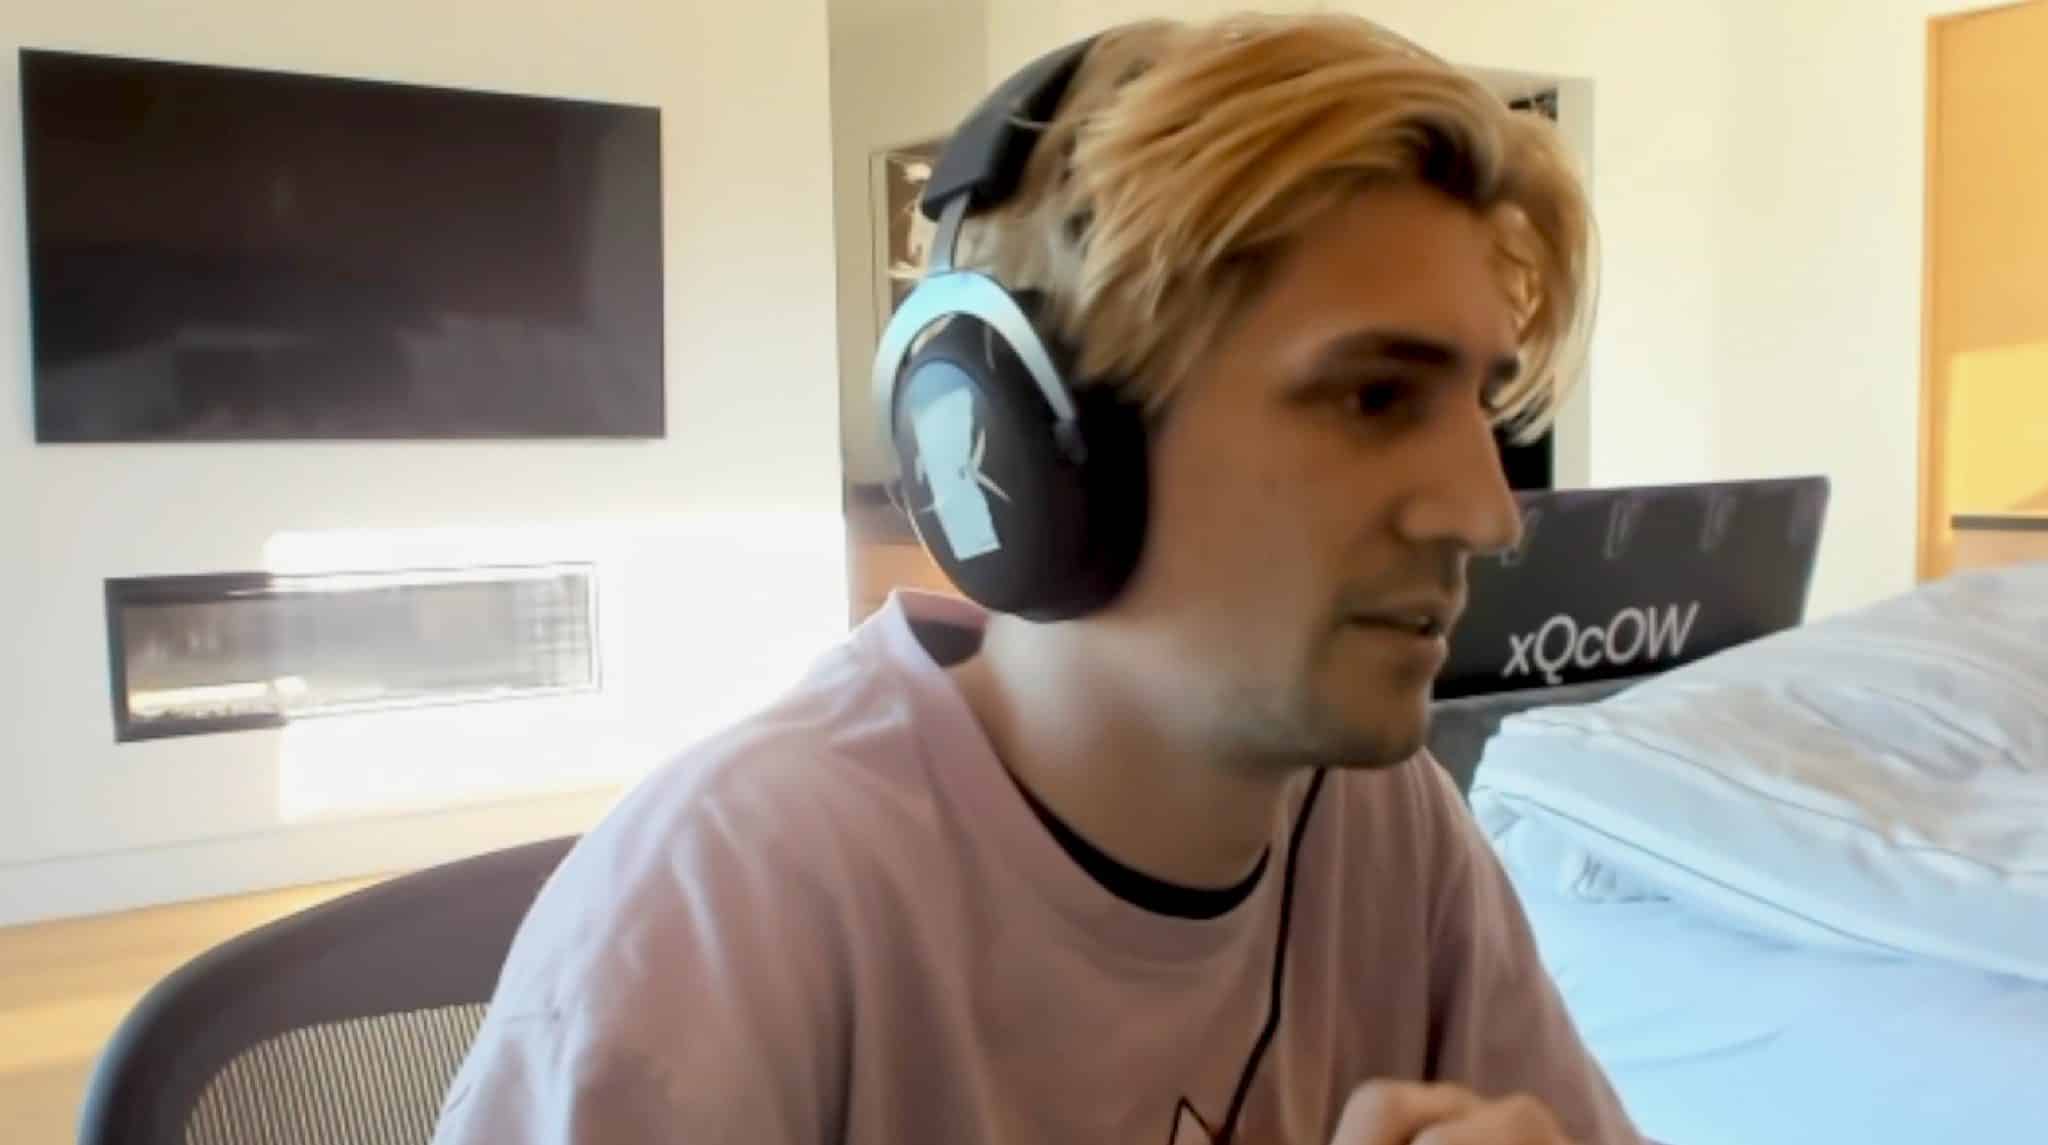 xQc streaming on Twitch